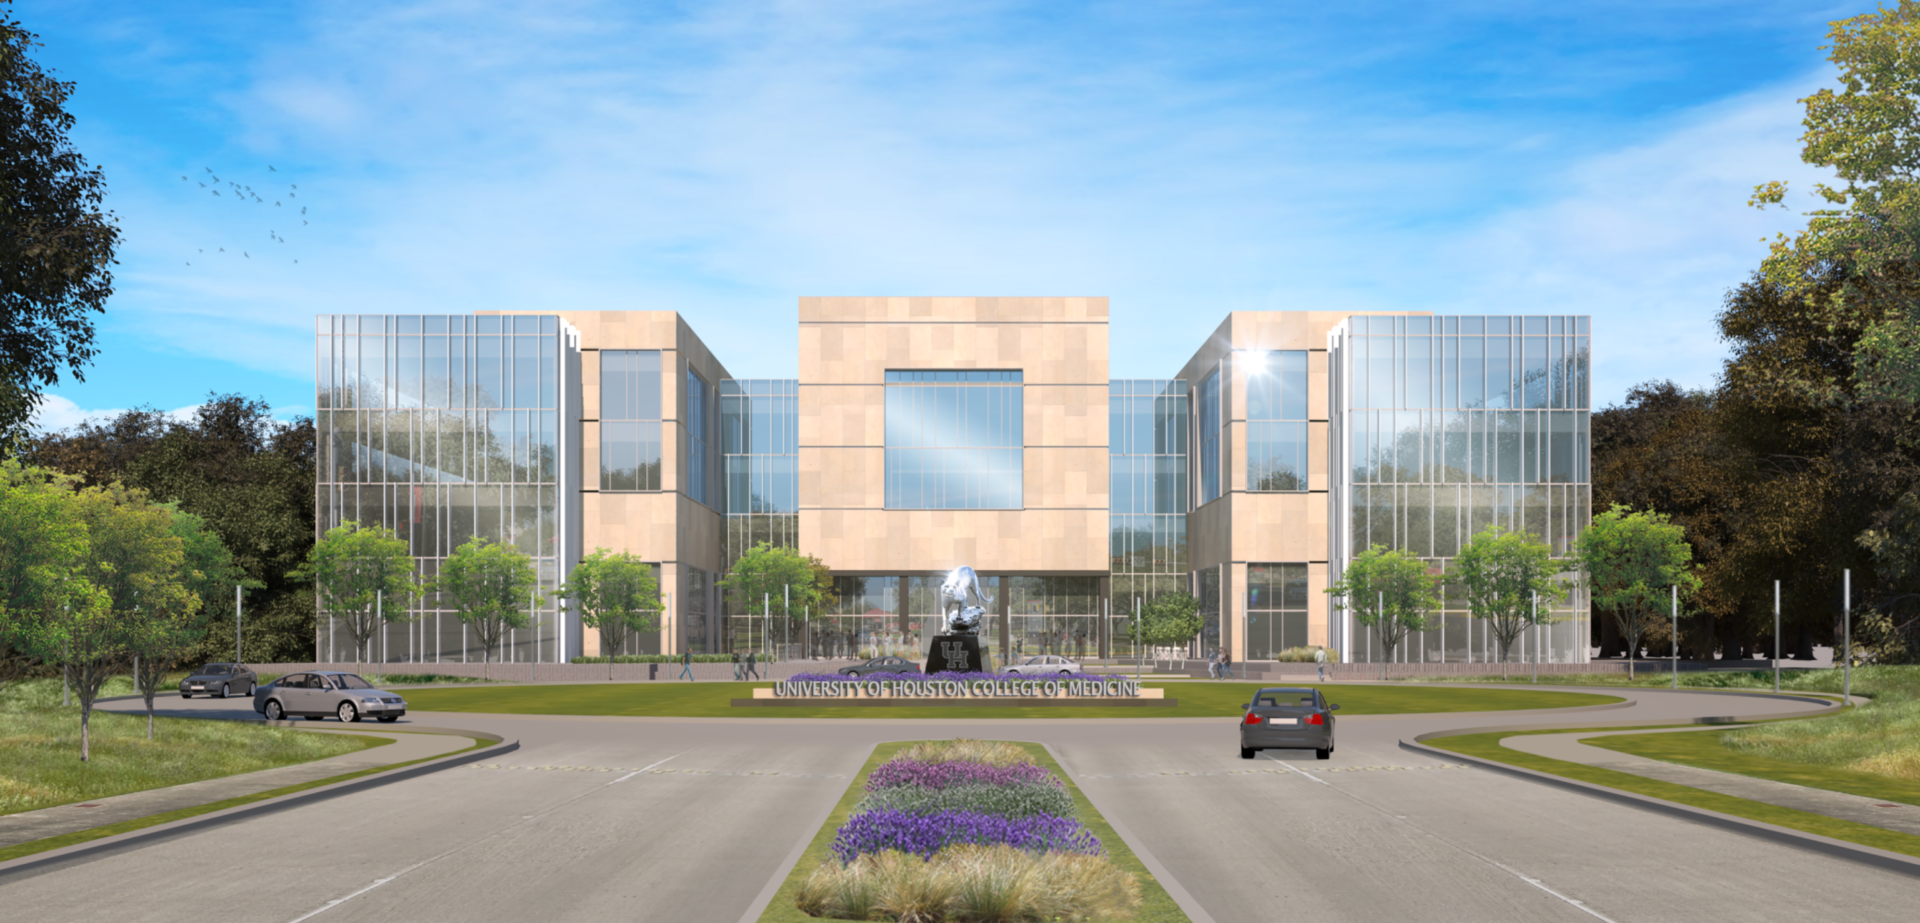 The UH College of Medicine, which broke ground on Monday, will call the Health 2 building its temporary home until the medical school's expected completion in 2022. | Courtesy of UH